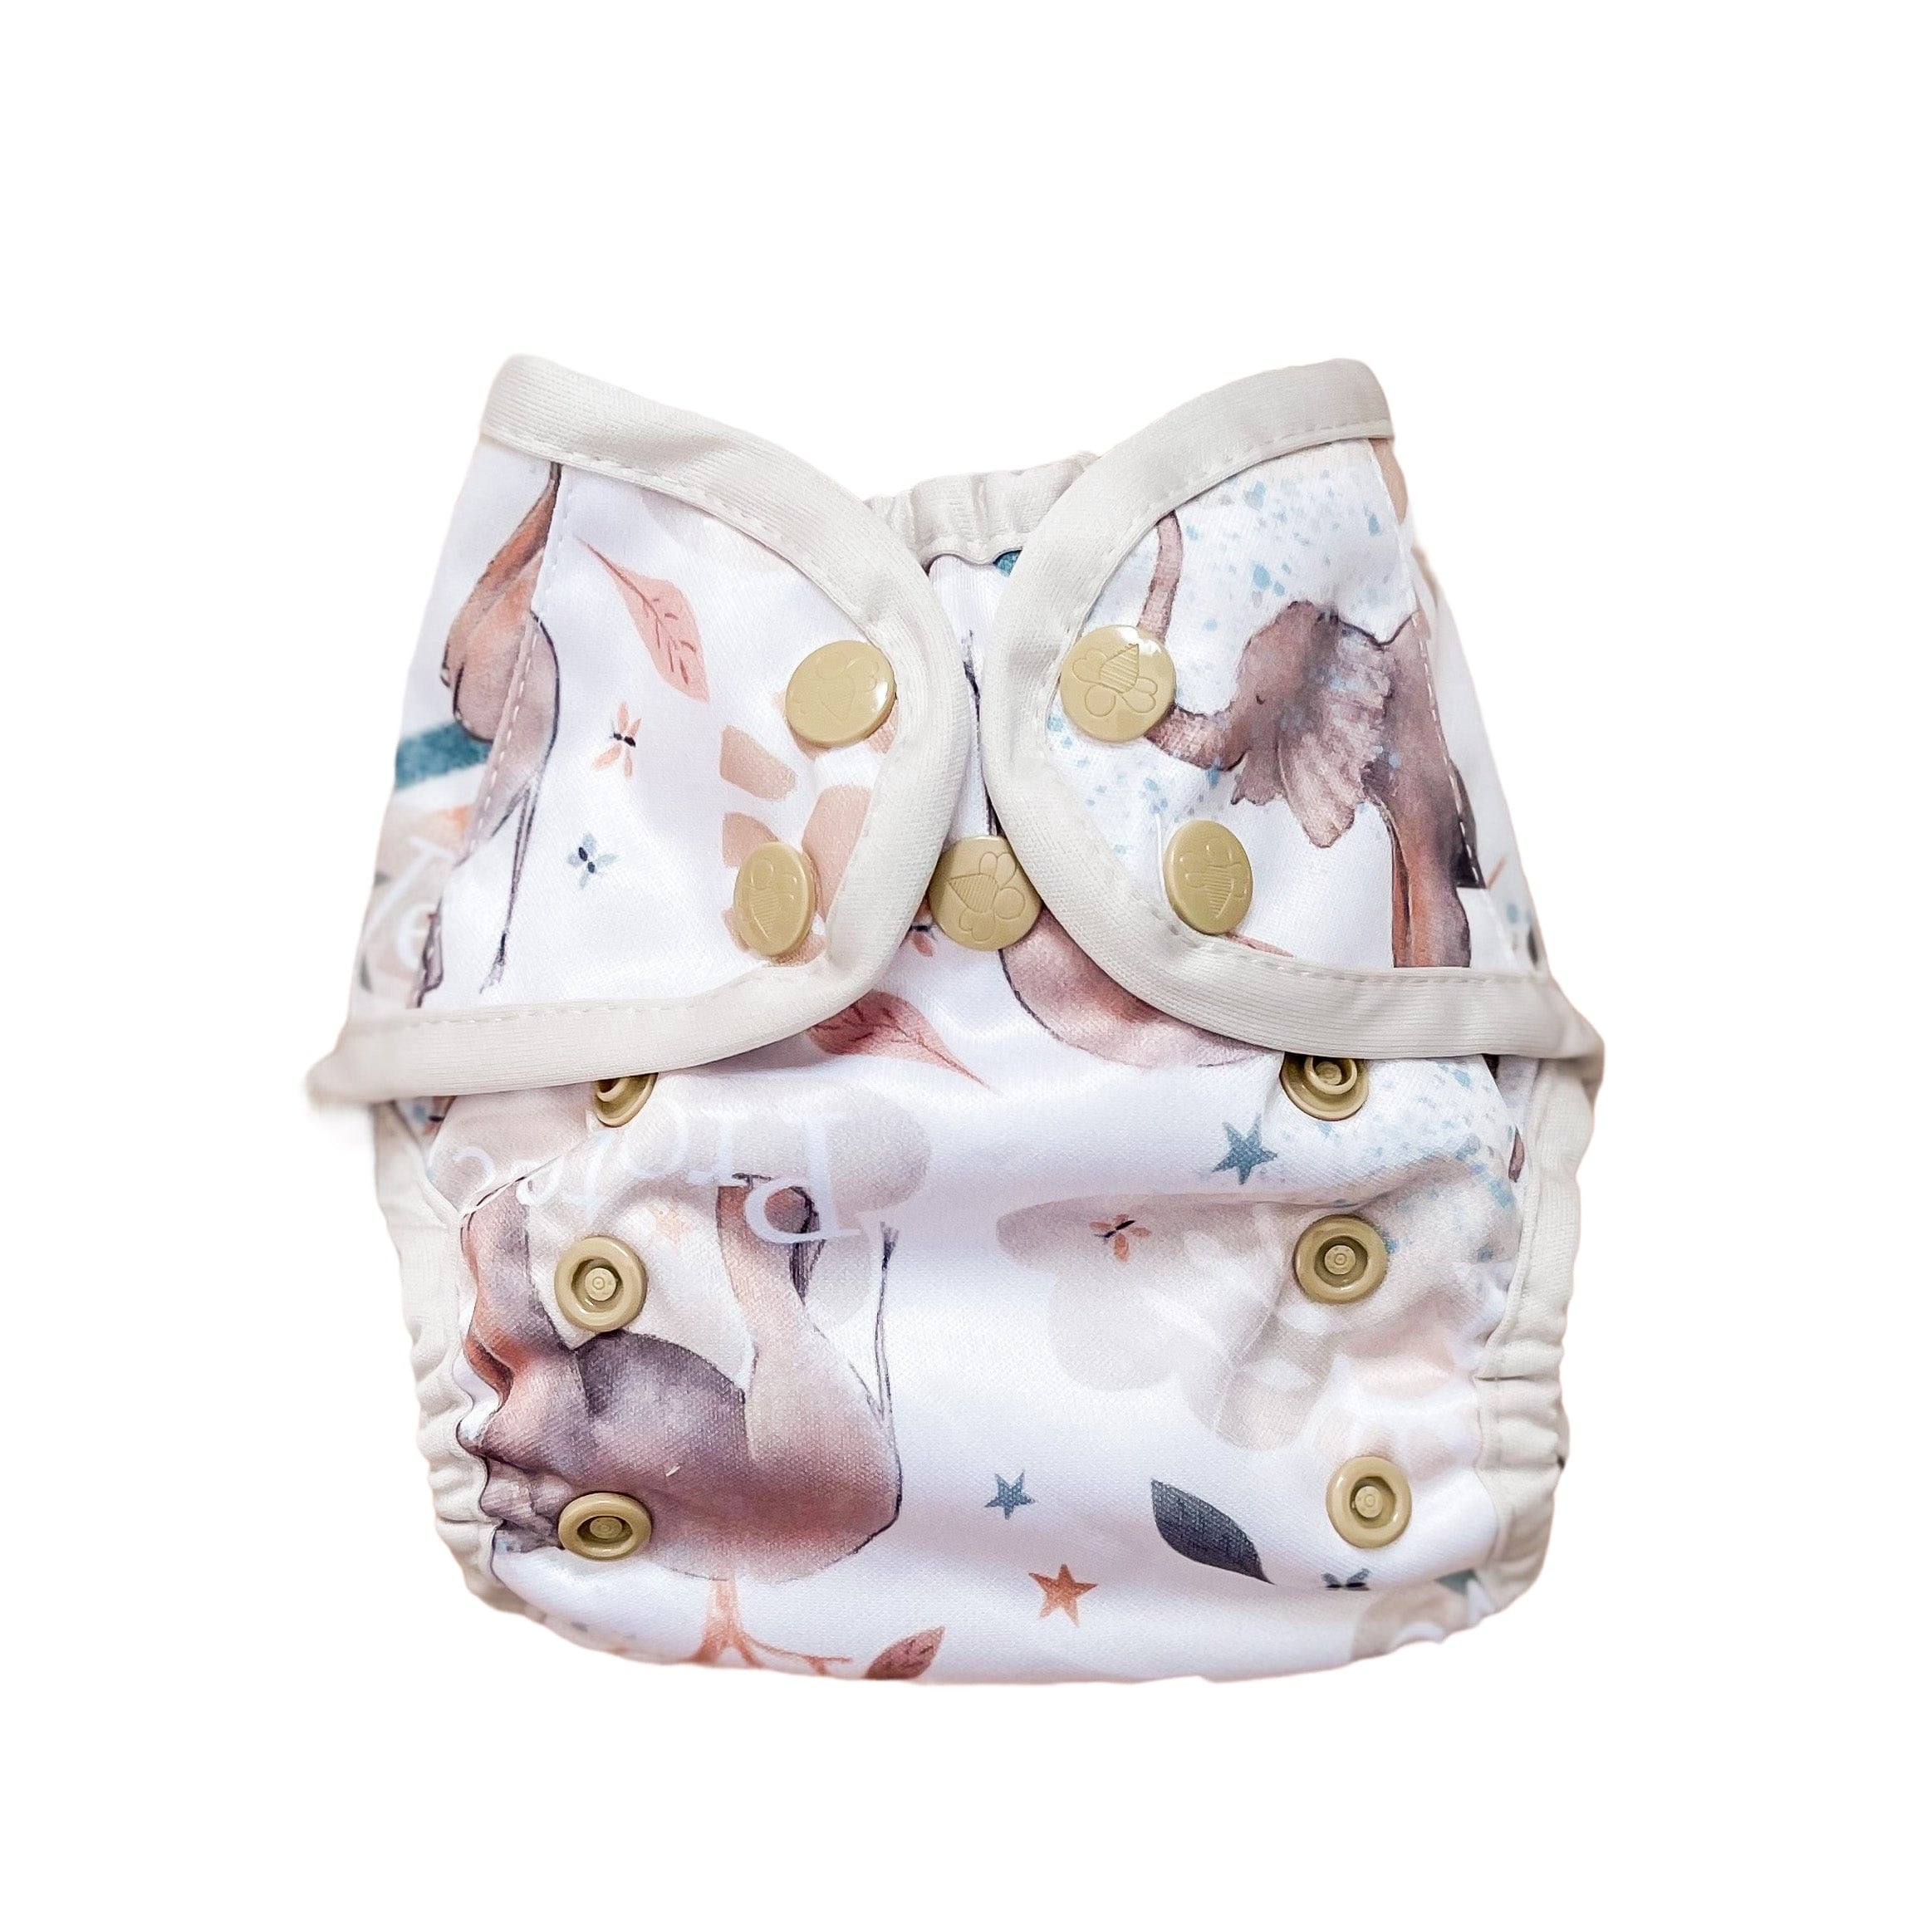 The "bally"  Newborn Diaper Cover By Happy Beehinds - Prints